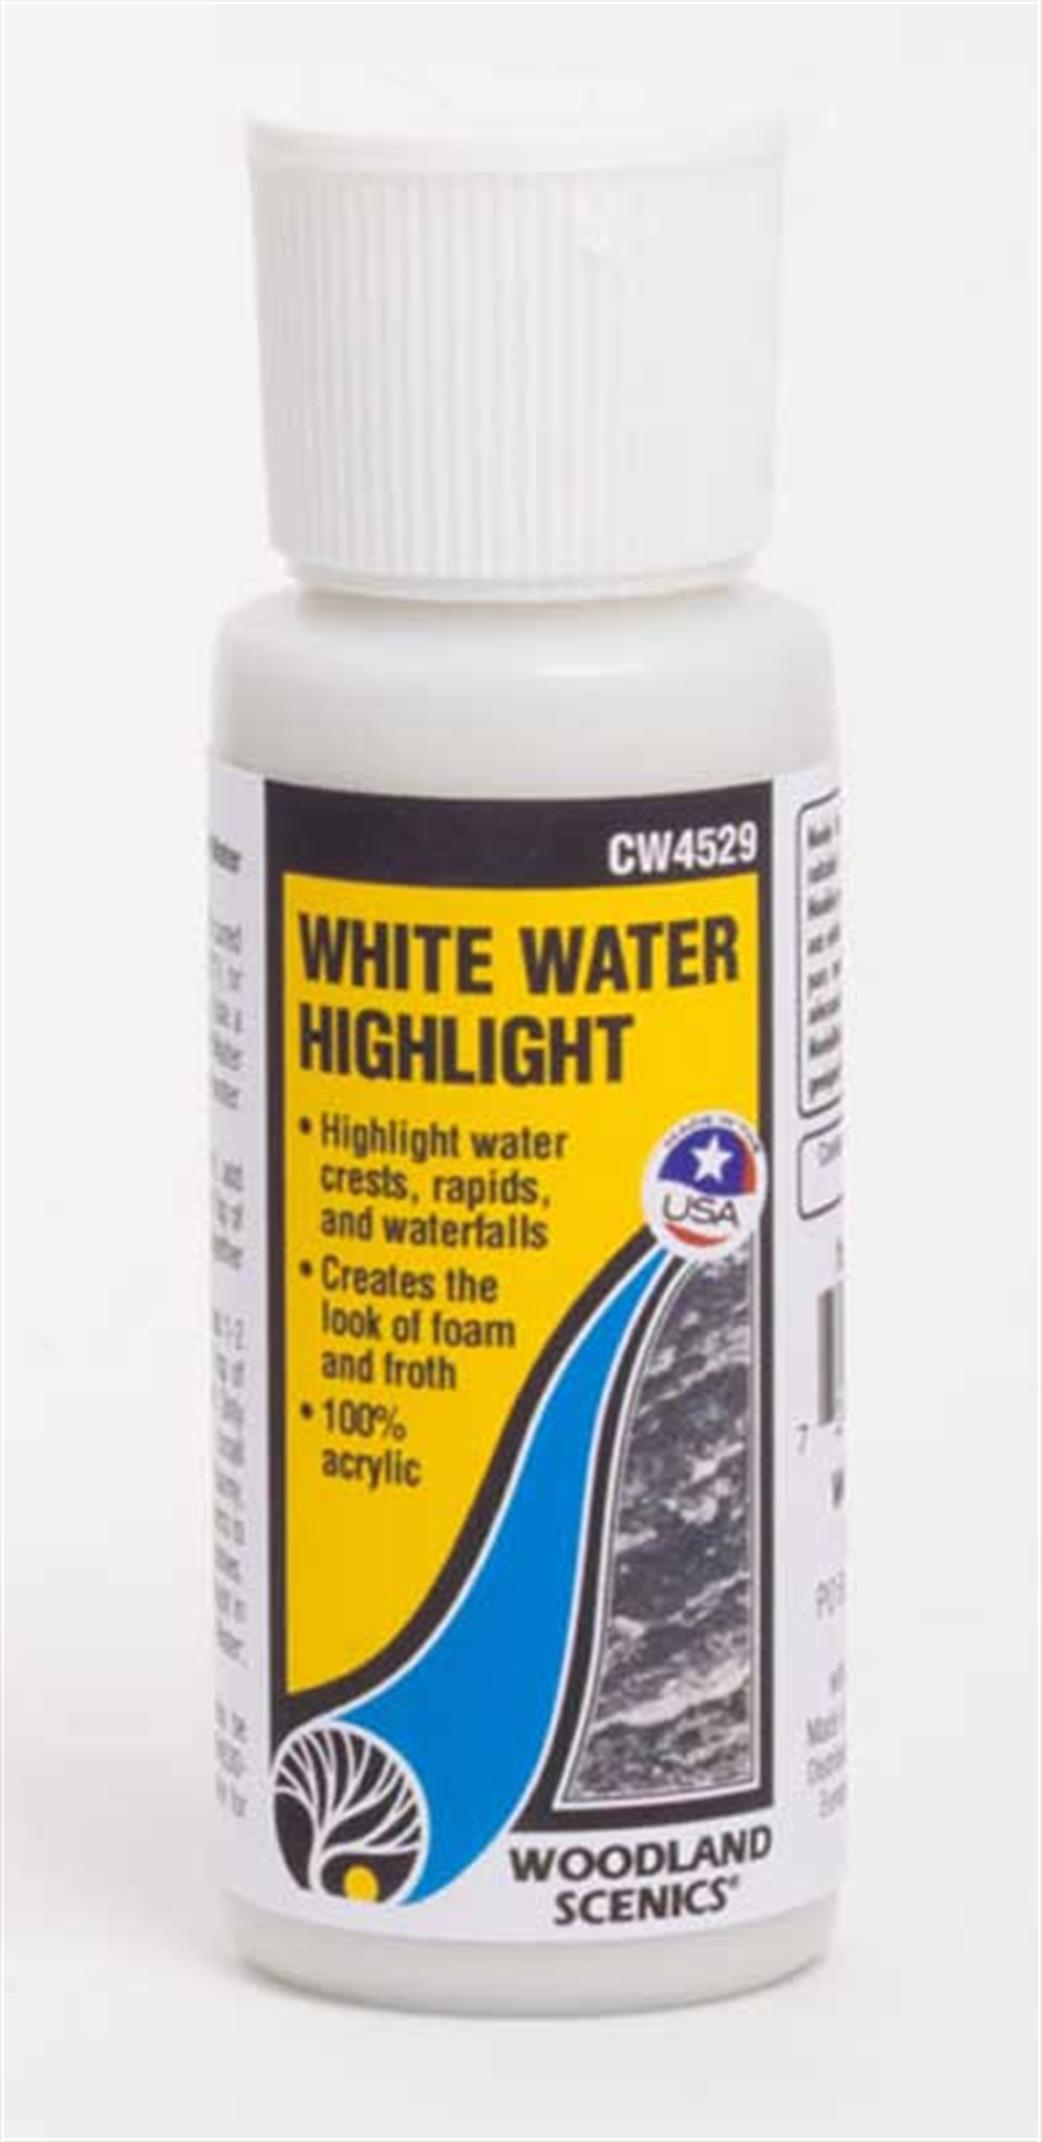 Woodland Scenics CW4529 White Water Highlight Water Tint